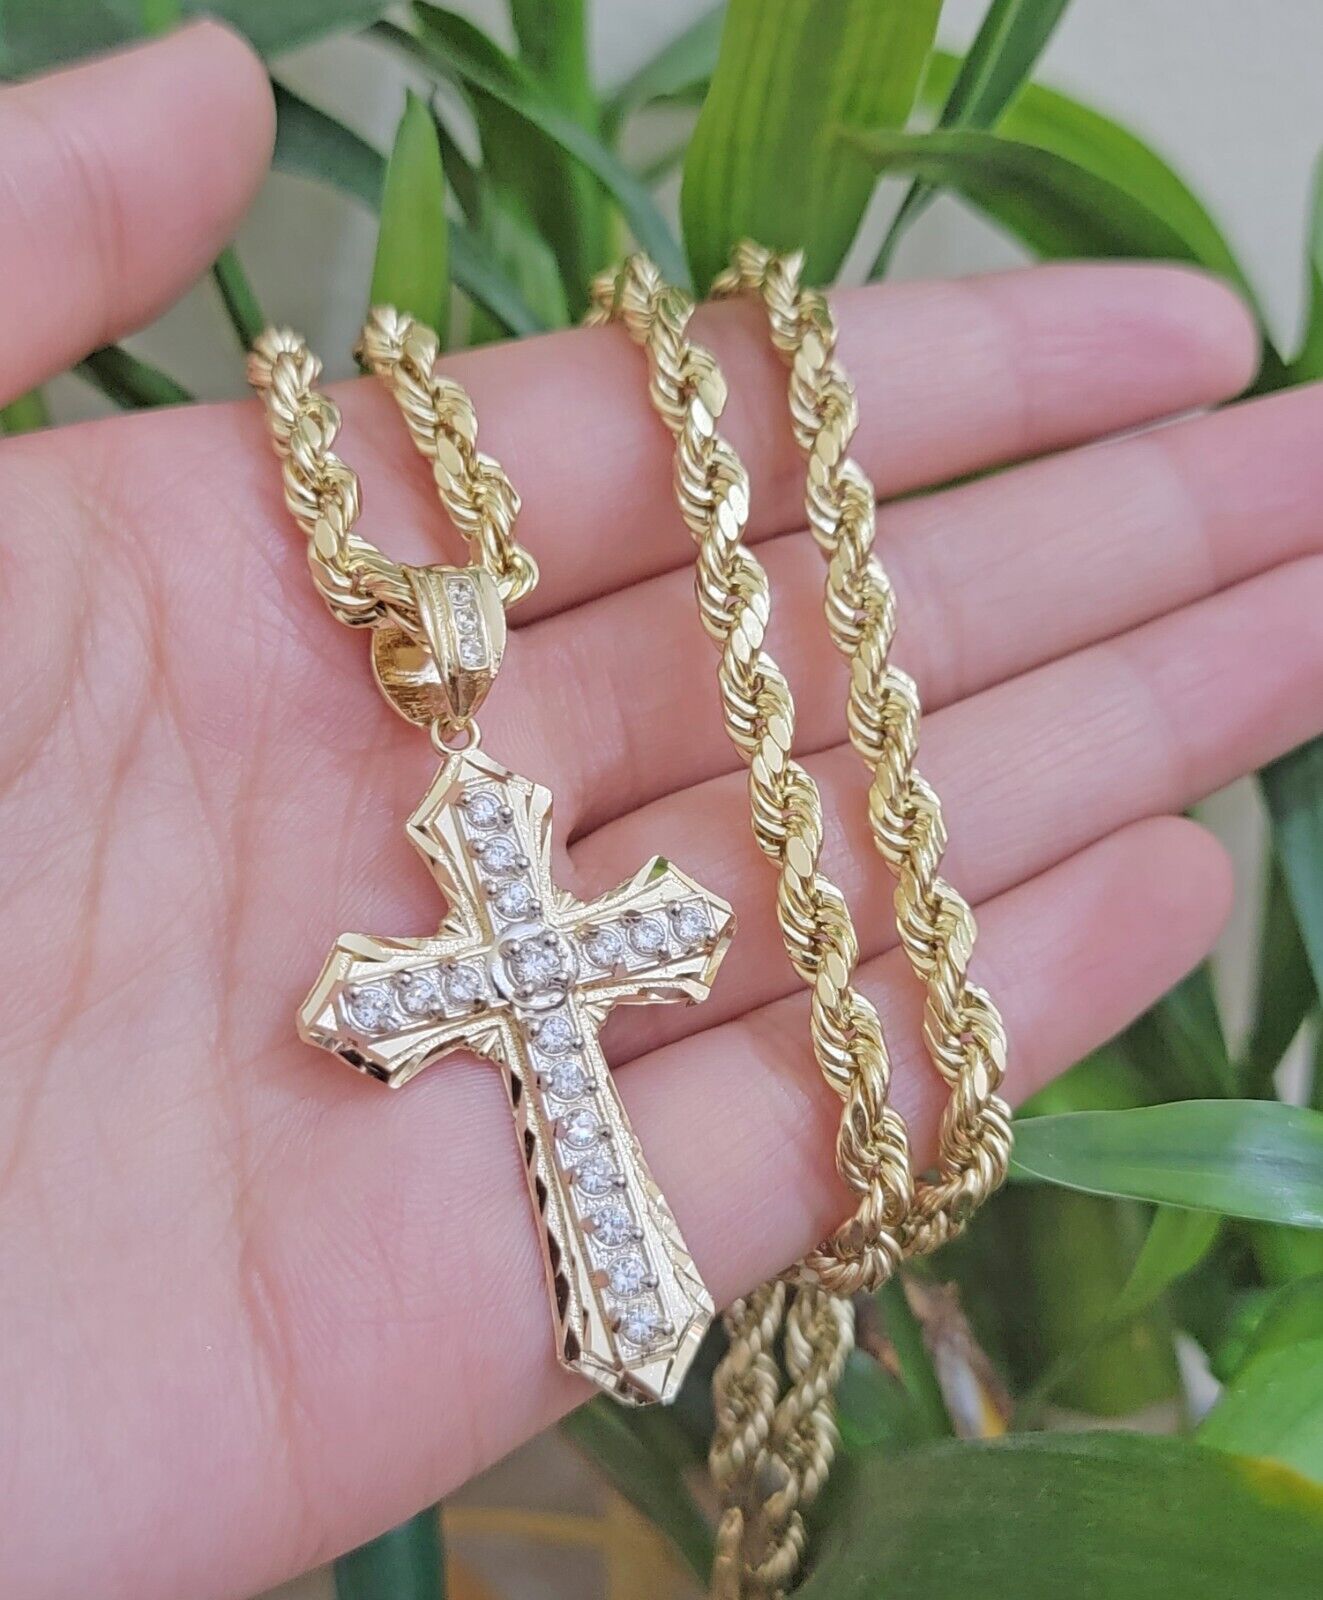 10k Gold Rope Chain Necklace & Cross Charm Pendant Set 28" inch 5mm, REAL 10kt